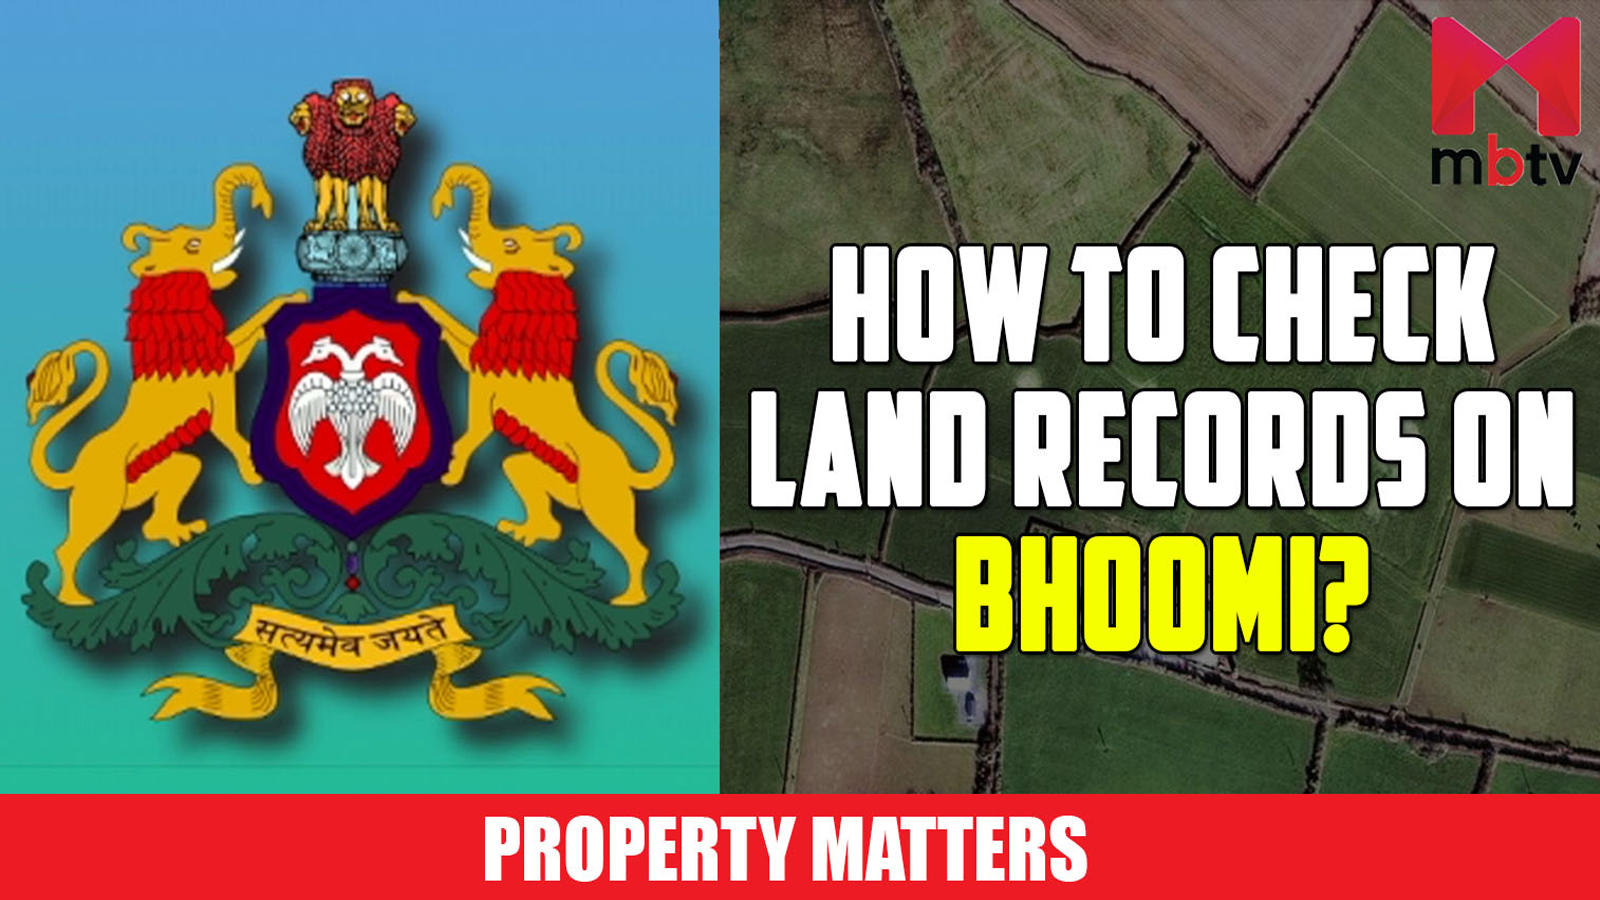 How to check land records in Bhoomi? | Times Property - Times of India  Videos